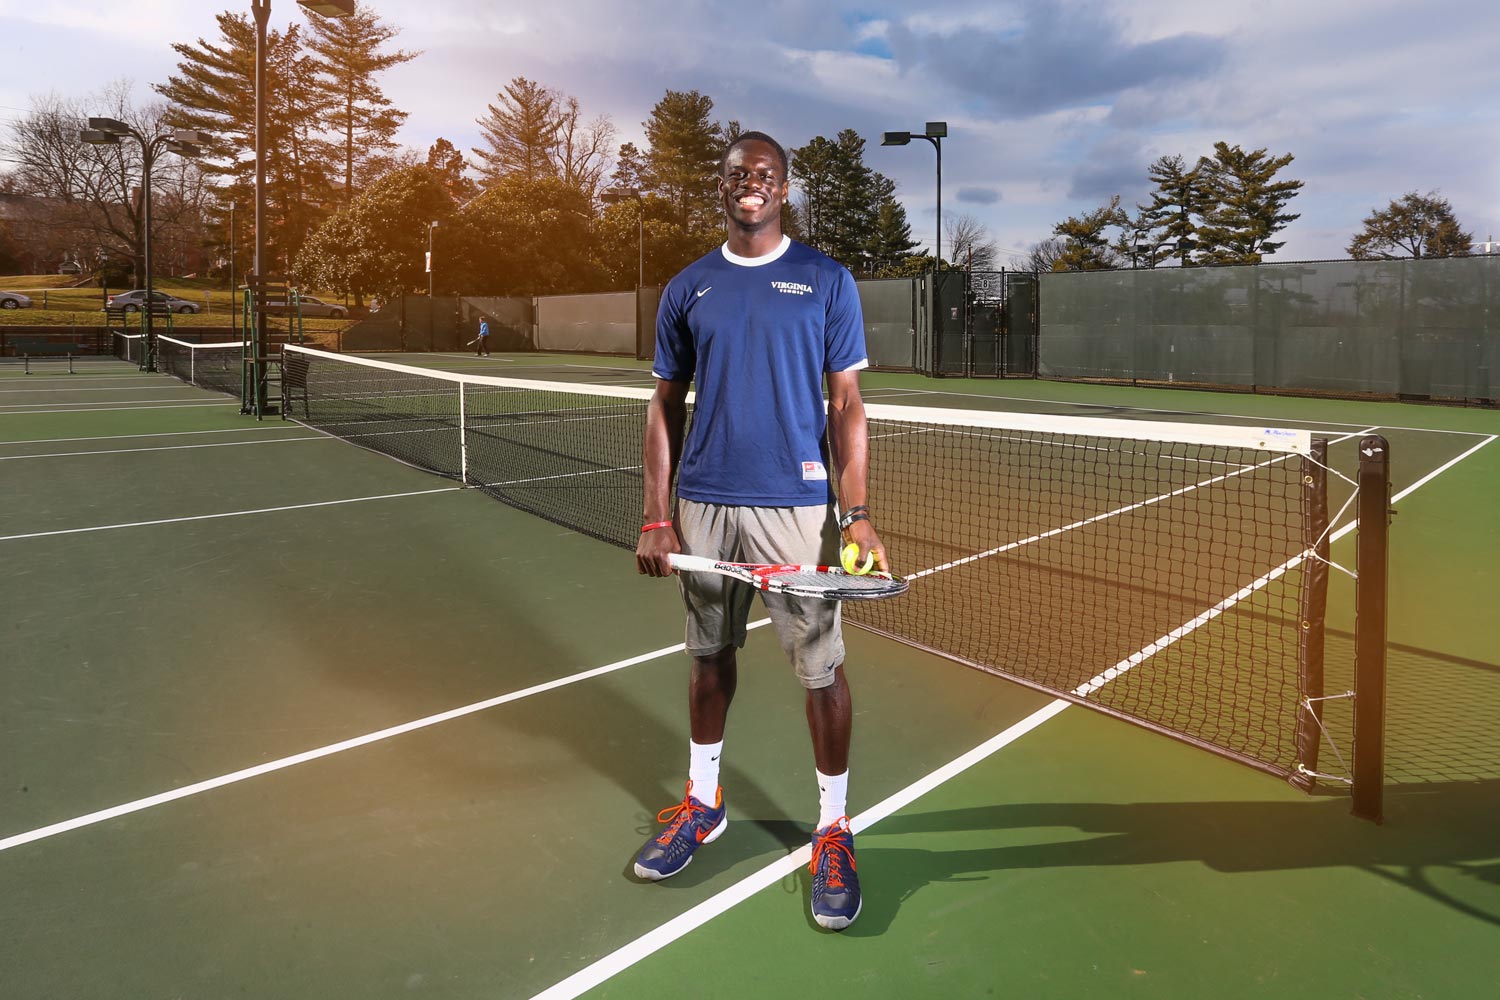 Jarmere Jenkins stands on the tennis court smiling at the camera